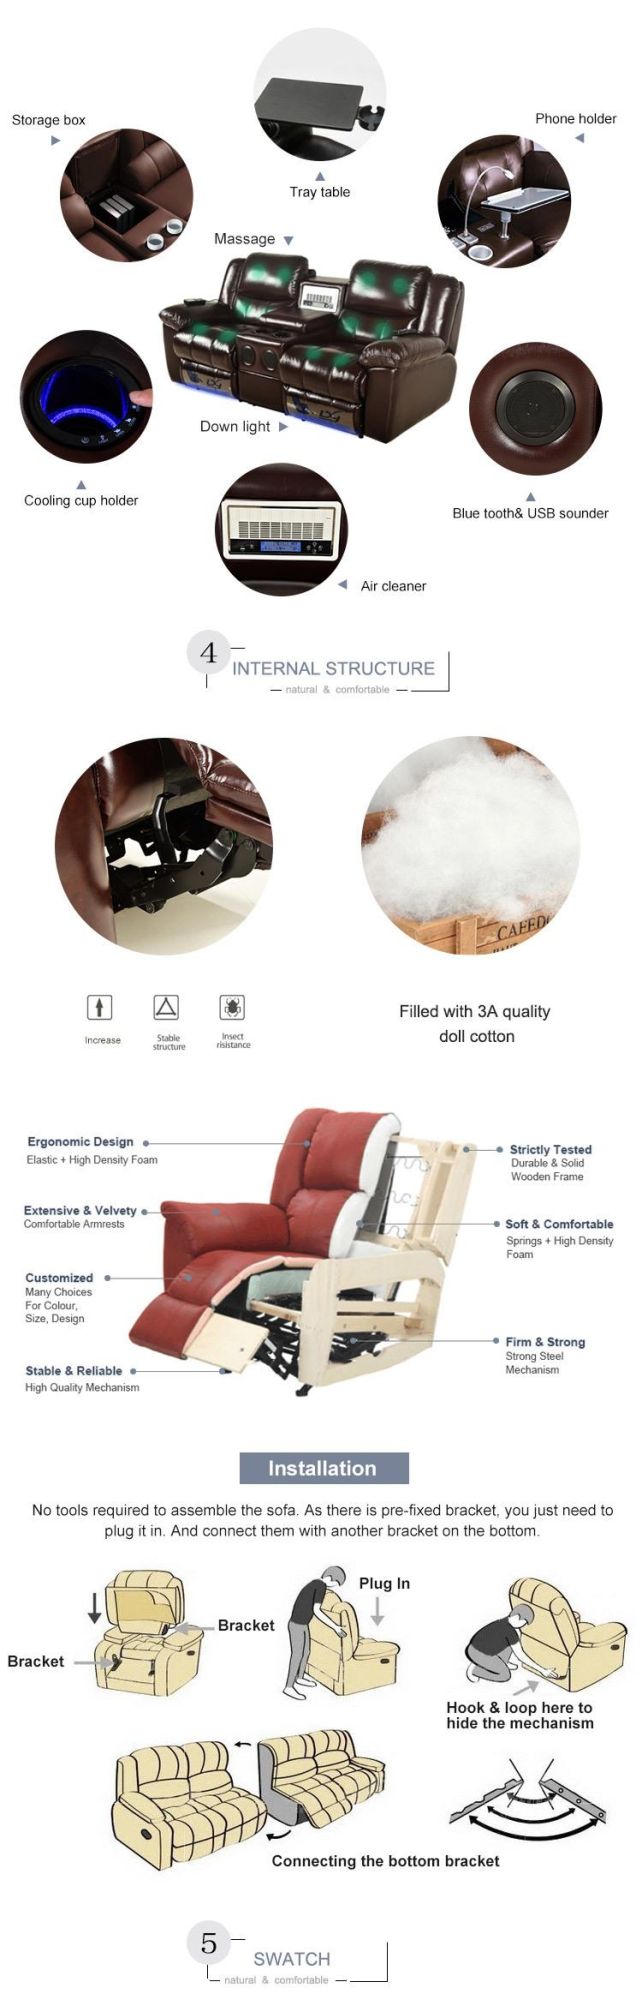 High Quality Fabric Best Manual Recliner Swivel Chair for Sales